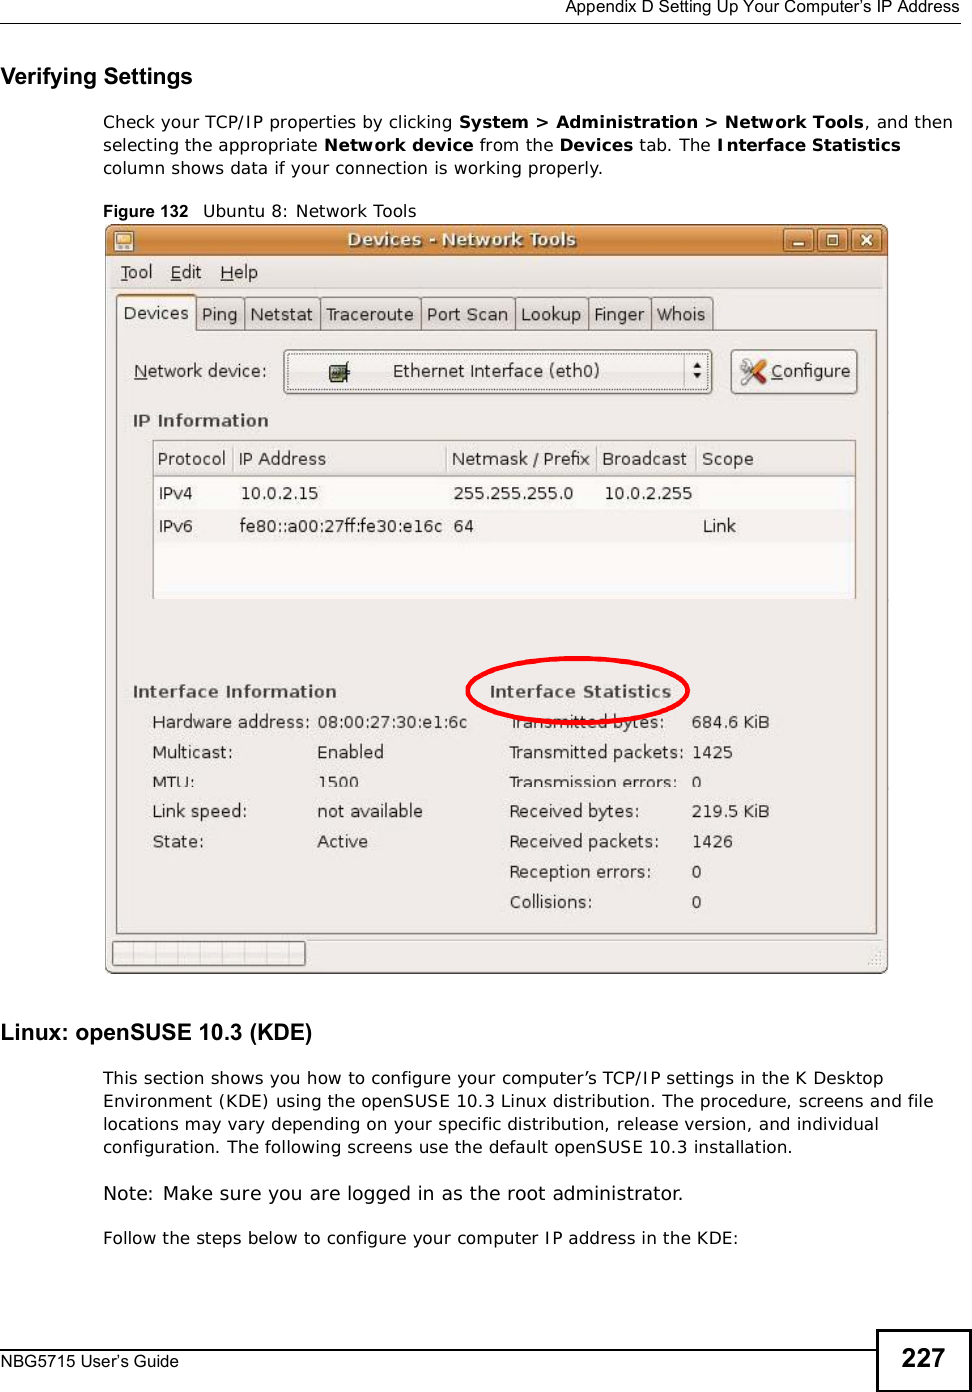  Appendix DSetting Up Your Computer’s IP AddressNBG5715 User’s Guide 227Verifying SettingsCheck your TCP/IP properties by clicking System &gt; Administration &gt; Network Tools, and then selecting the appropriate Network device from the Devices tab. The Interface Statistics column shows data if your connection is working properly.Figure 132   Ubuntu 8: Network ToolsLinux: openSUSE 10.3 (KDE)This section shows you how to configure your computer’s TCP/IP settings in the K Desktop Environment (KDE) using the openSUSE 10.3 Linux distribution. The procedure, screens and file locations may vary depending on your specific distribution, release version, and individual configuration. The following screens use the default openSUSE 10.3 installation.Note: Make sure you are logged in as the root administrator. Follow the steps below to configure your computer IP address in the KDE: